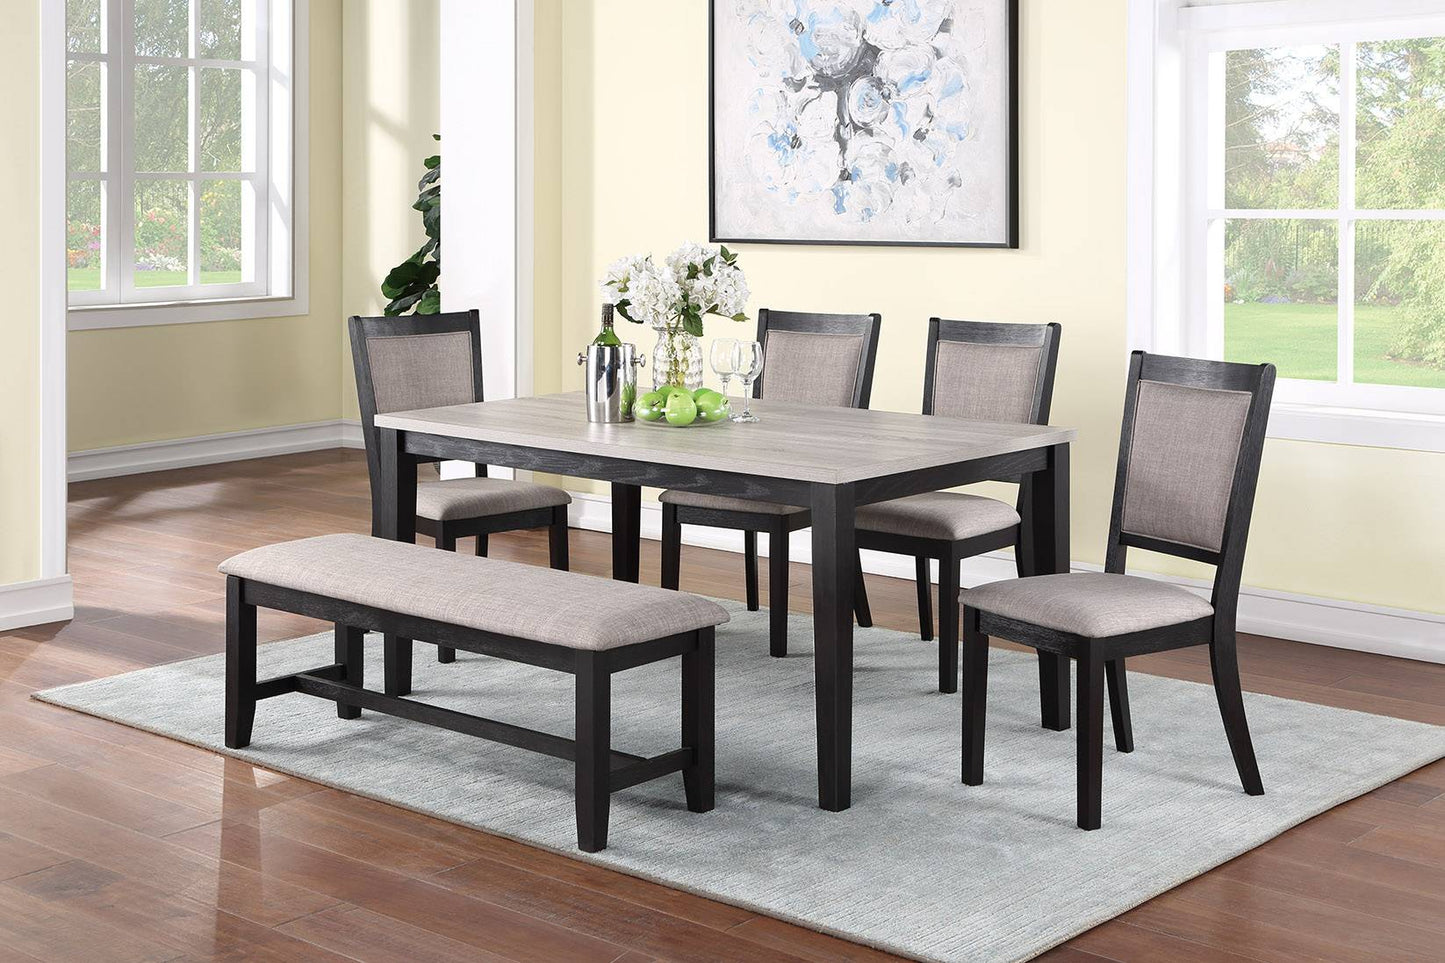 6 PIECES DINING SET WITH BENCH, F2607